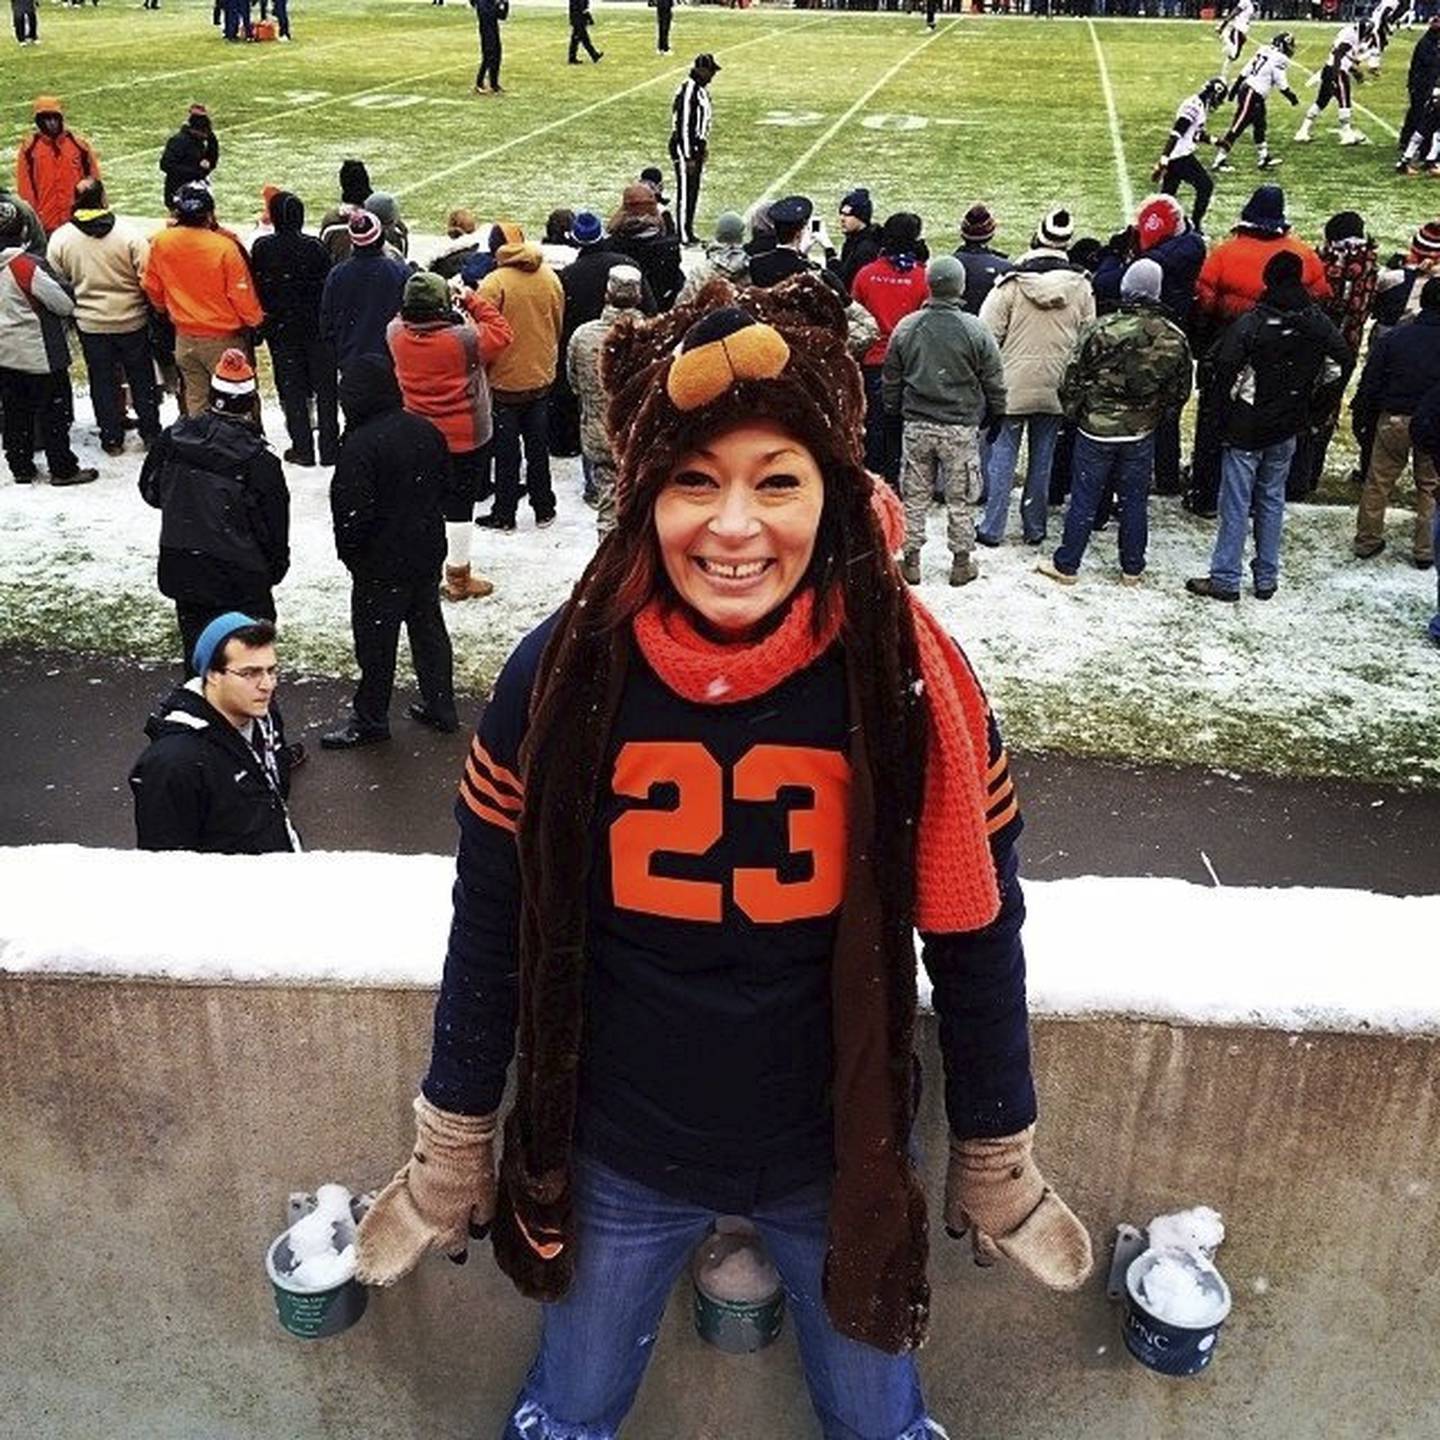 Chicago Bears fan Vanessa Corral for a Bears-Browns game in 2014.